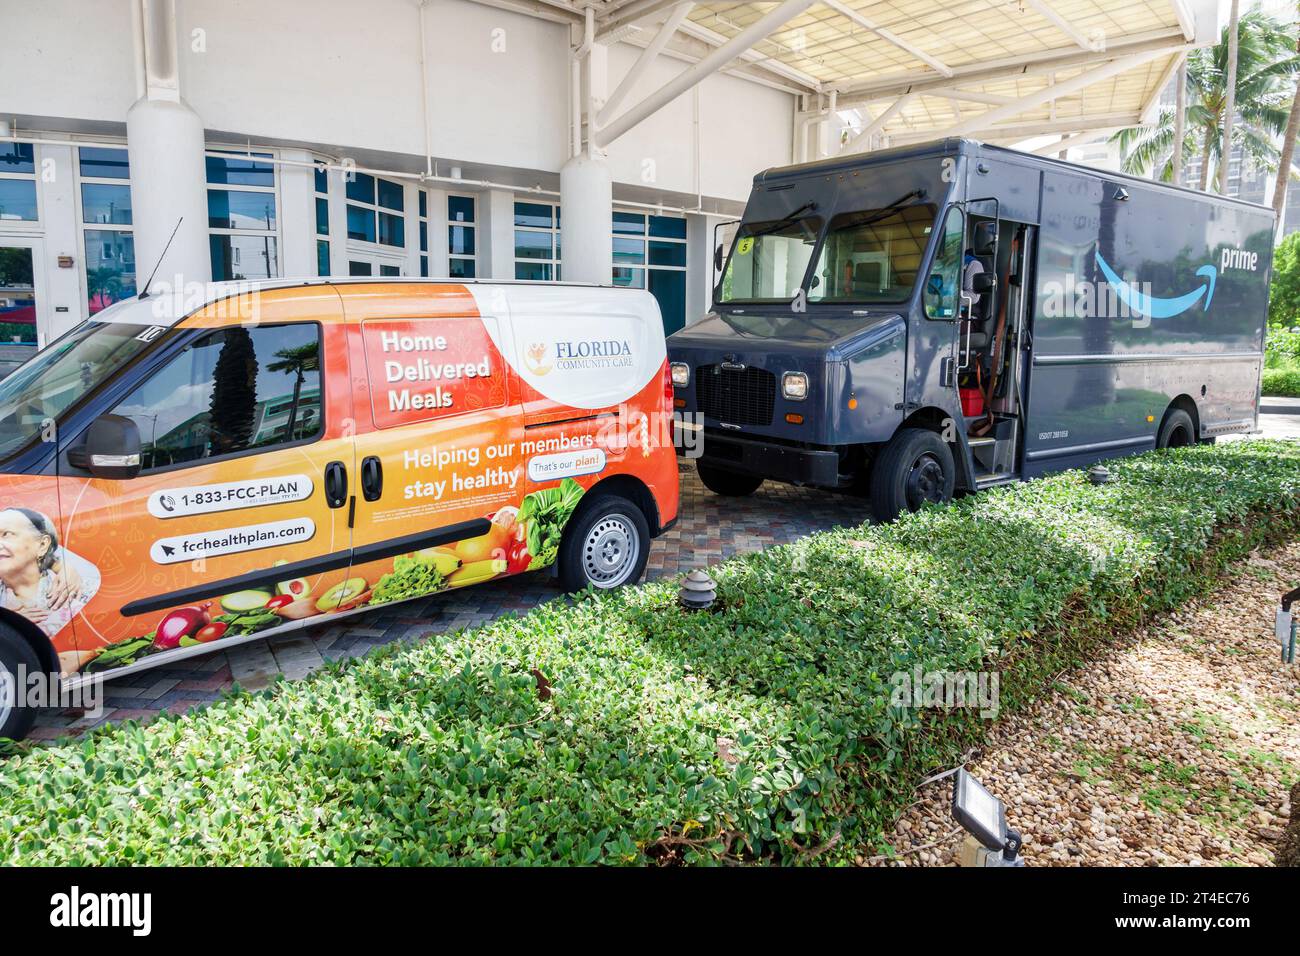 Miami Beach Florida,outside exterior,building front entrance hotel,Collins Avenue,Amazon Prime delivery EV electric van vehicle,home delivered meals l Stock Photo